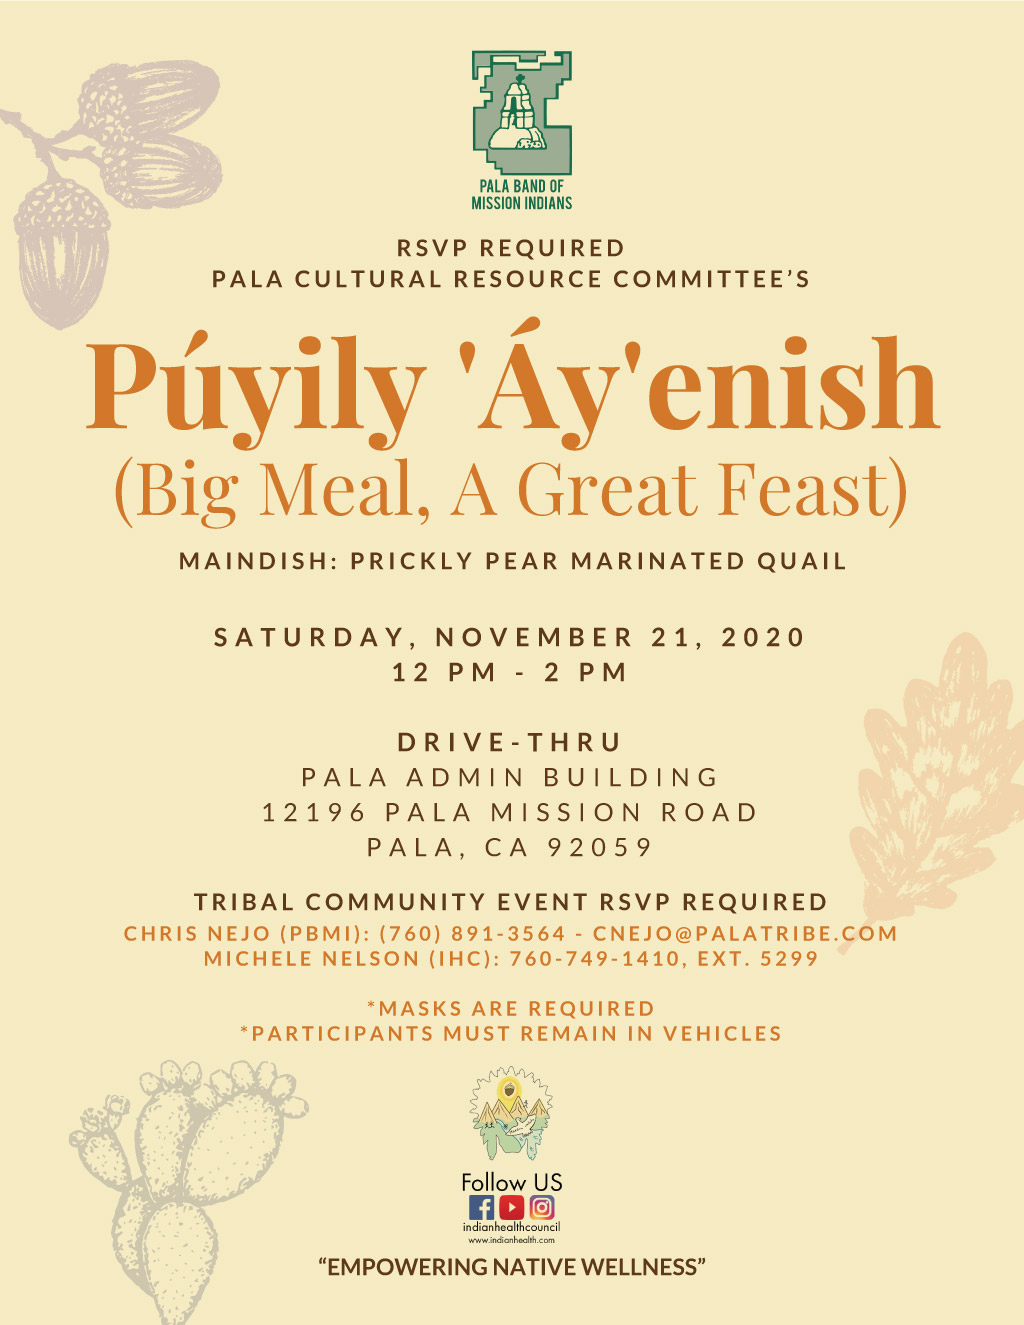 Pala Band of Mission Indians Indian Health Council California Púyily 'Áy'enish Big Meal A Great Feast 2020